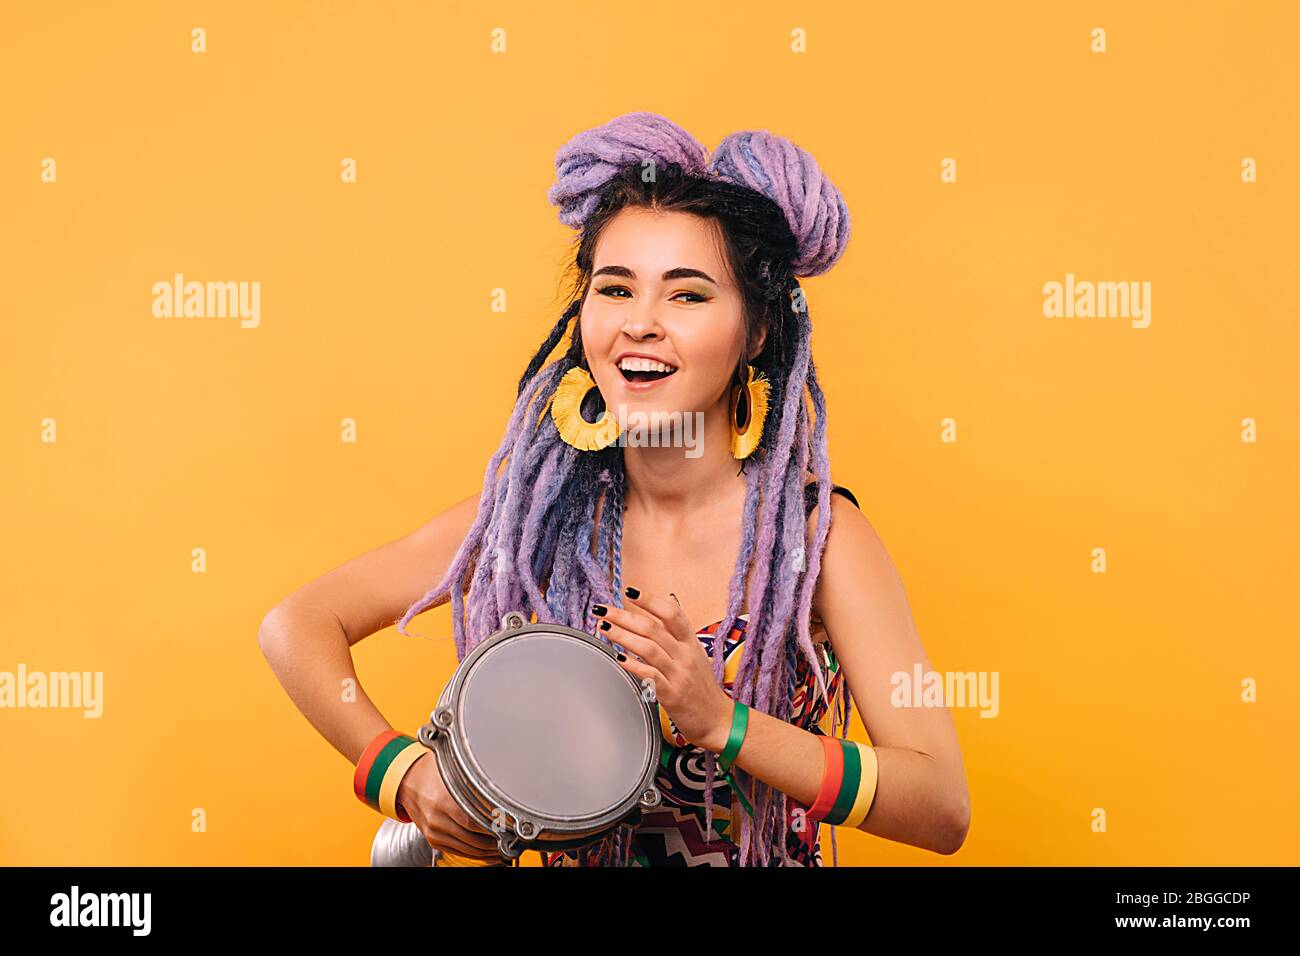 Rastafarian woman playing on ethical mini drum. Portrait woman with violet dreadlocks on a yellow background Stock Photo